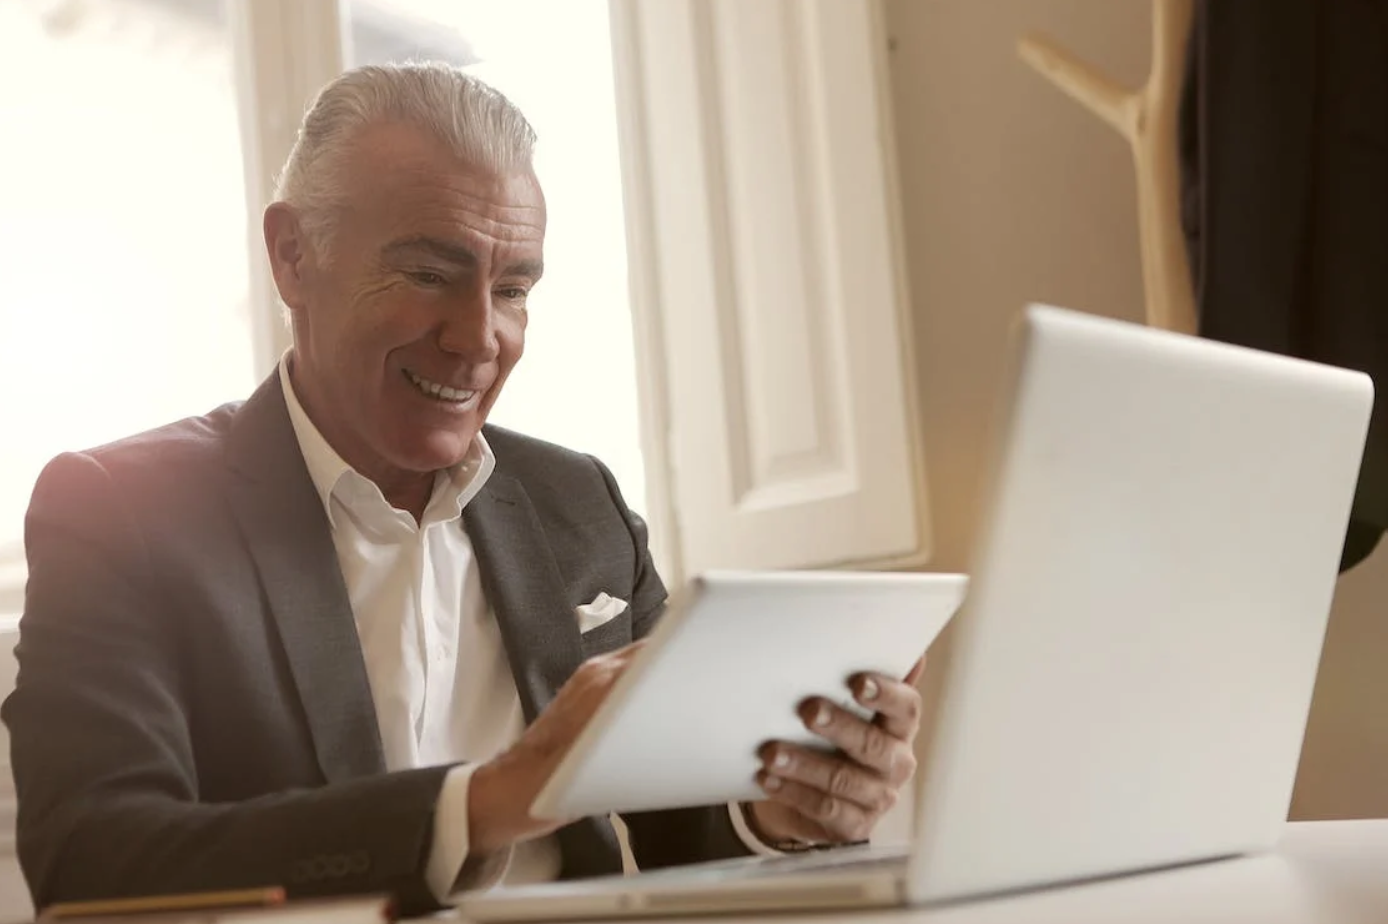 Older man using tablet and laptop; image by Andrea Piacquadio, via Unsplash.com.